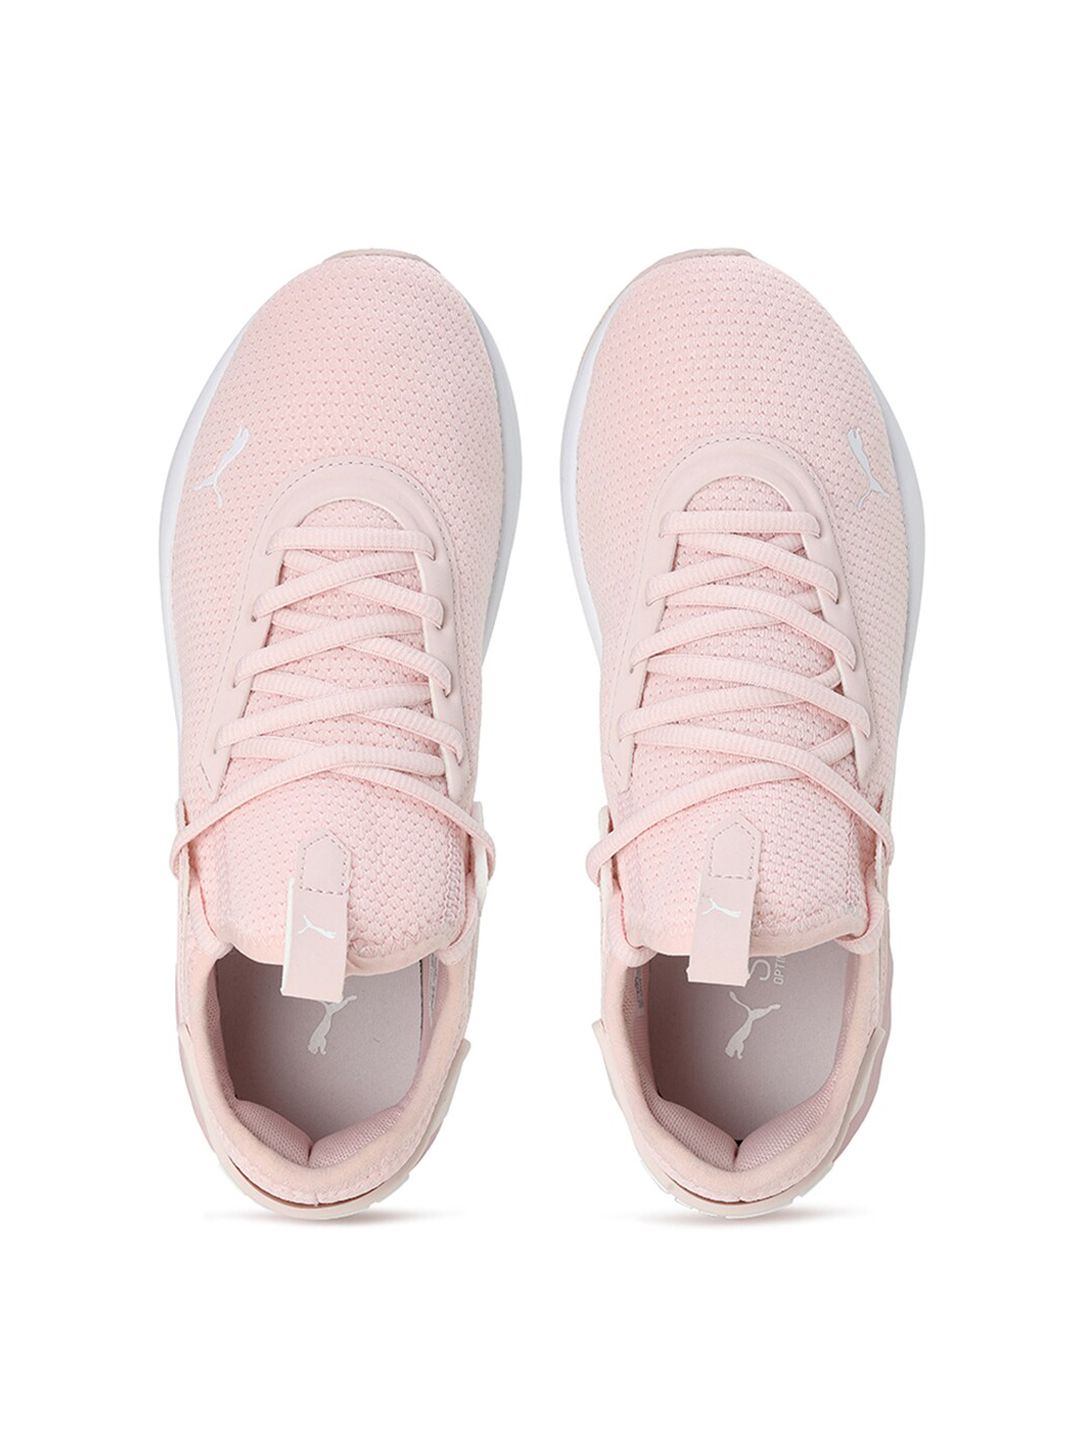 Puma Women Pink Textile Lace-Up Running Shoes Price in India